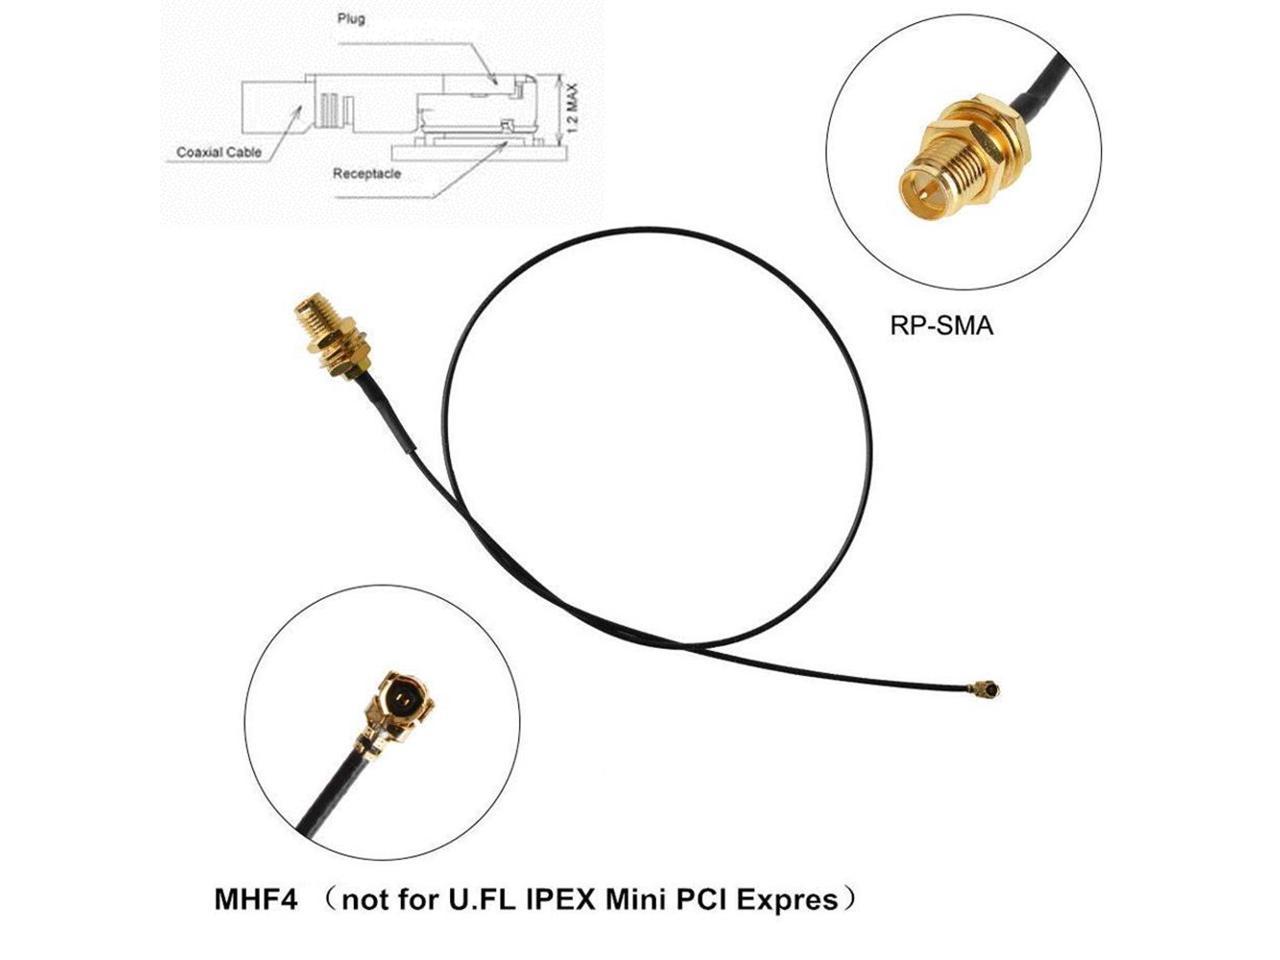 8dBi RP-SMA Dual Band 2.4GHz 5GHz 5.8G + 2 x M.2 IPEX 4 MHF4 Cable Antenna  for NGFF Wireless Cards M.2 3G 4G Cards for Intel AX201 AX200 9260 9560  8260 8265